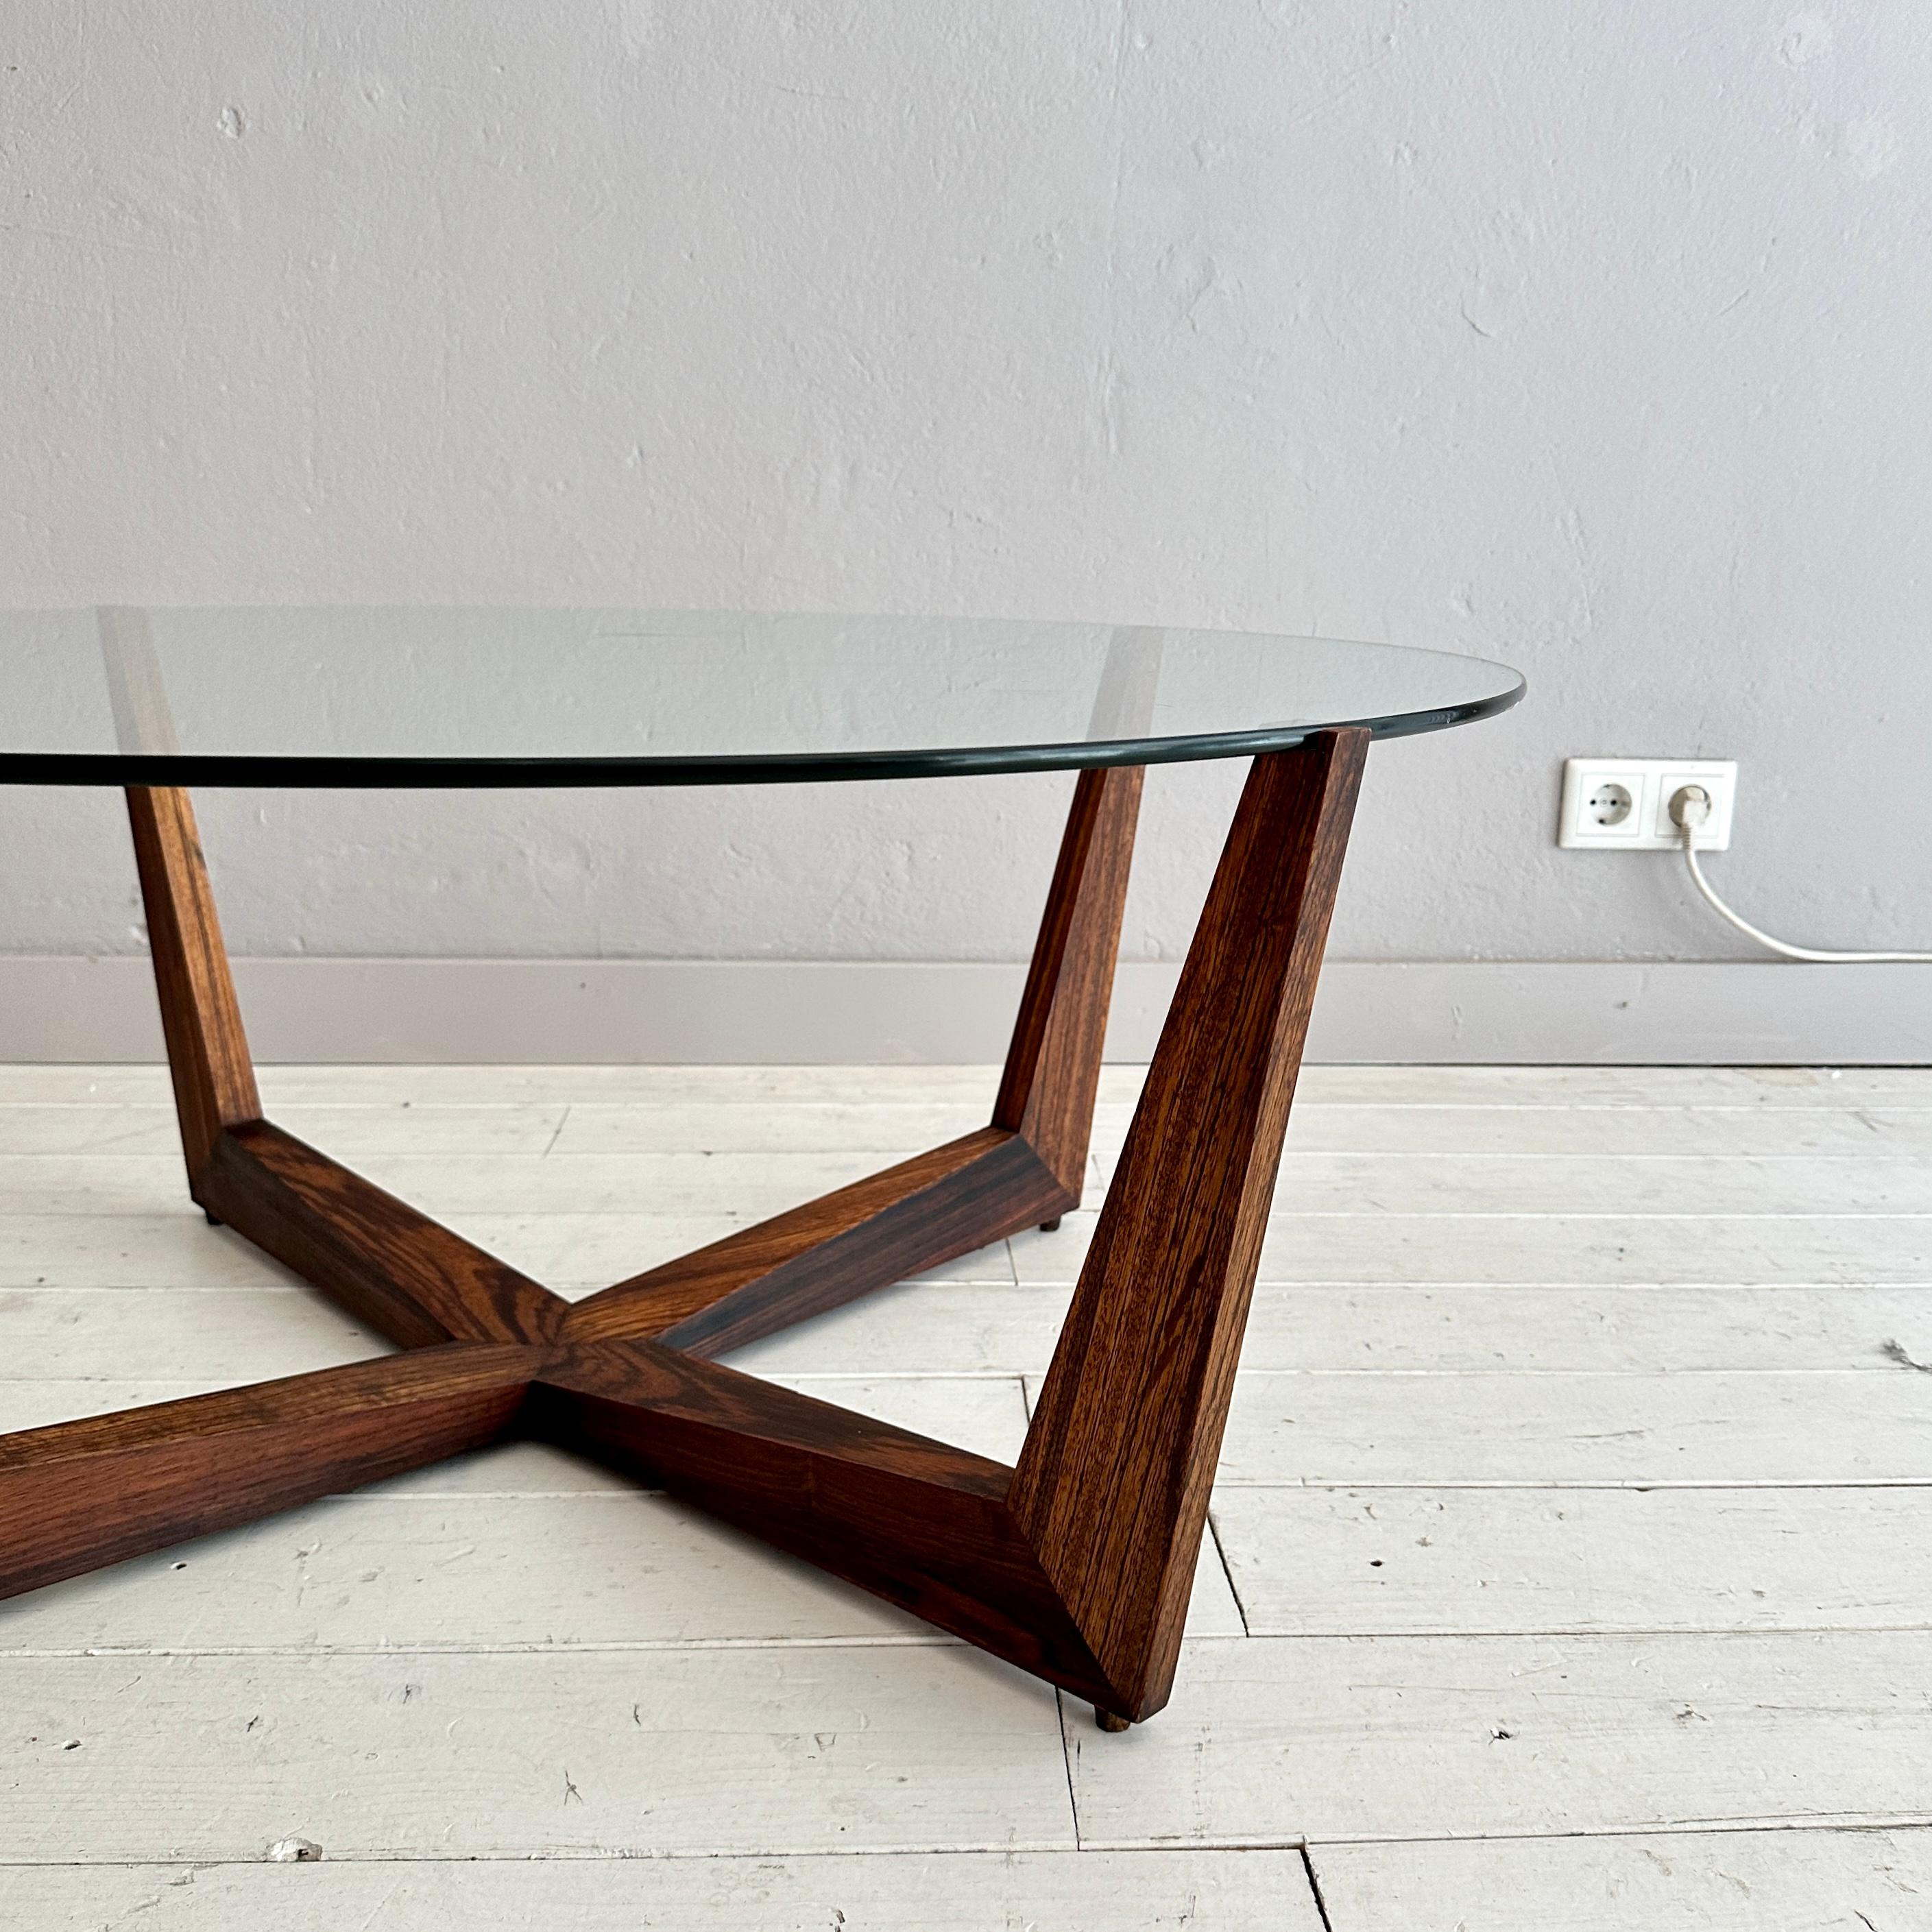 German Round Coffee Table by Wilhelm Renz in Teak and Glass, around 1960 For Sale